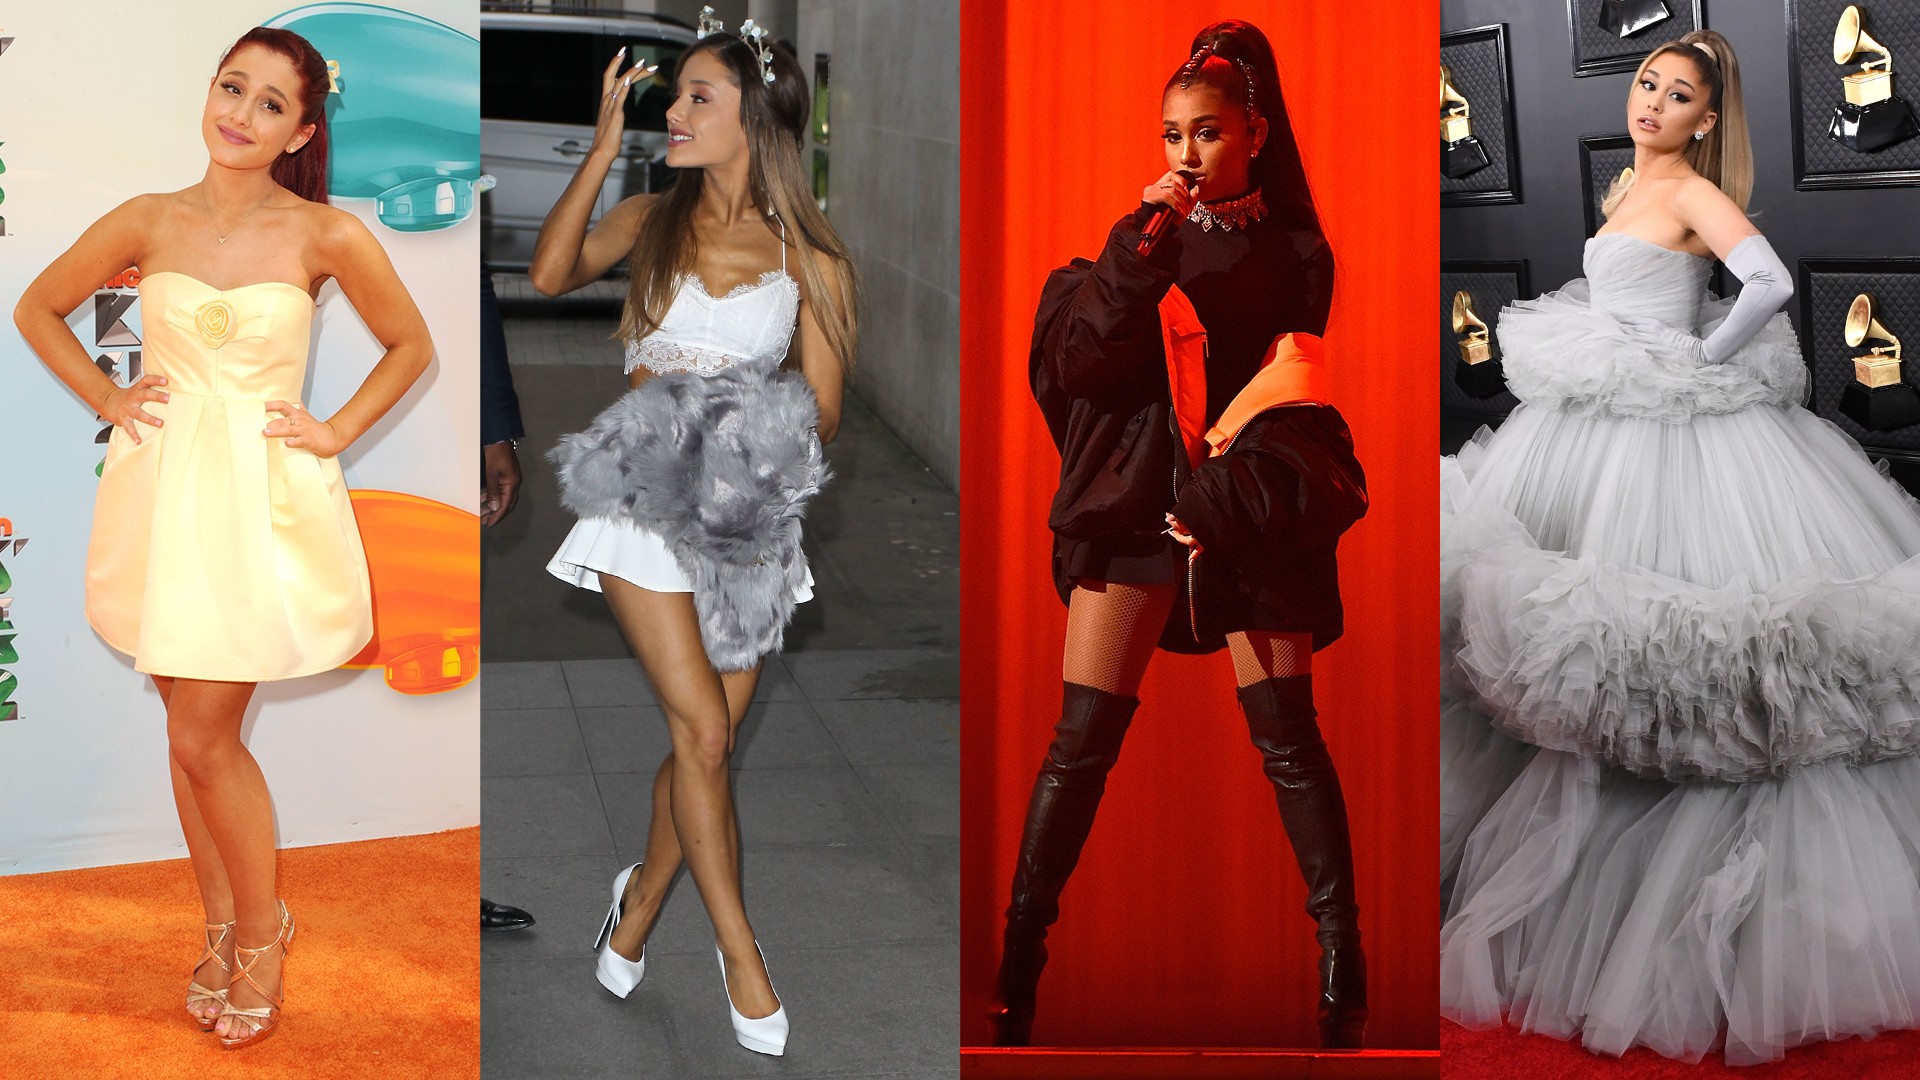 Ariana Grande: Fuzzy Sweater, Quilted Bag